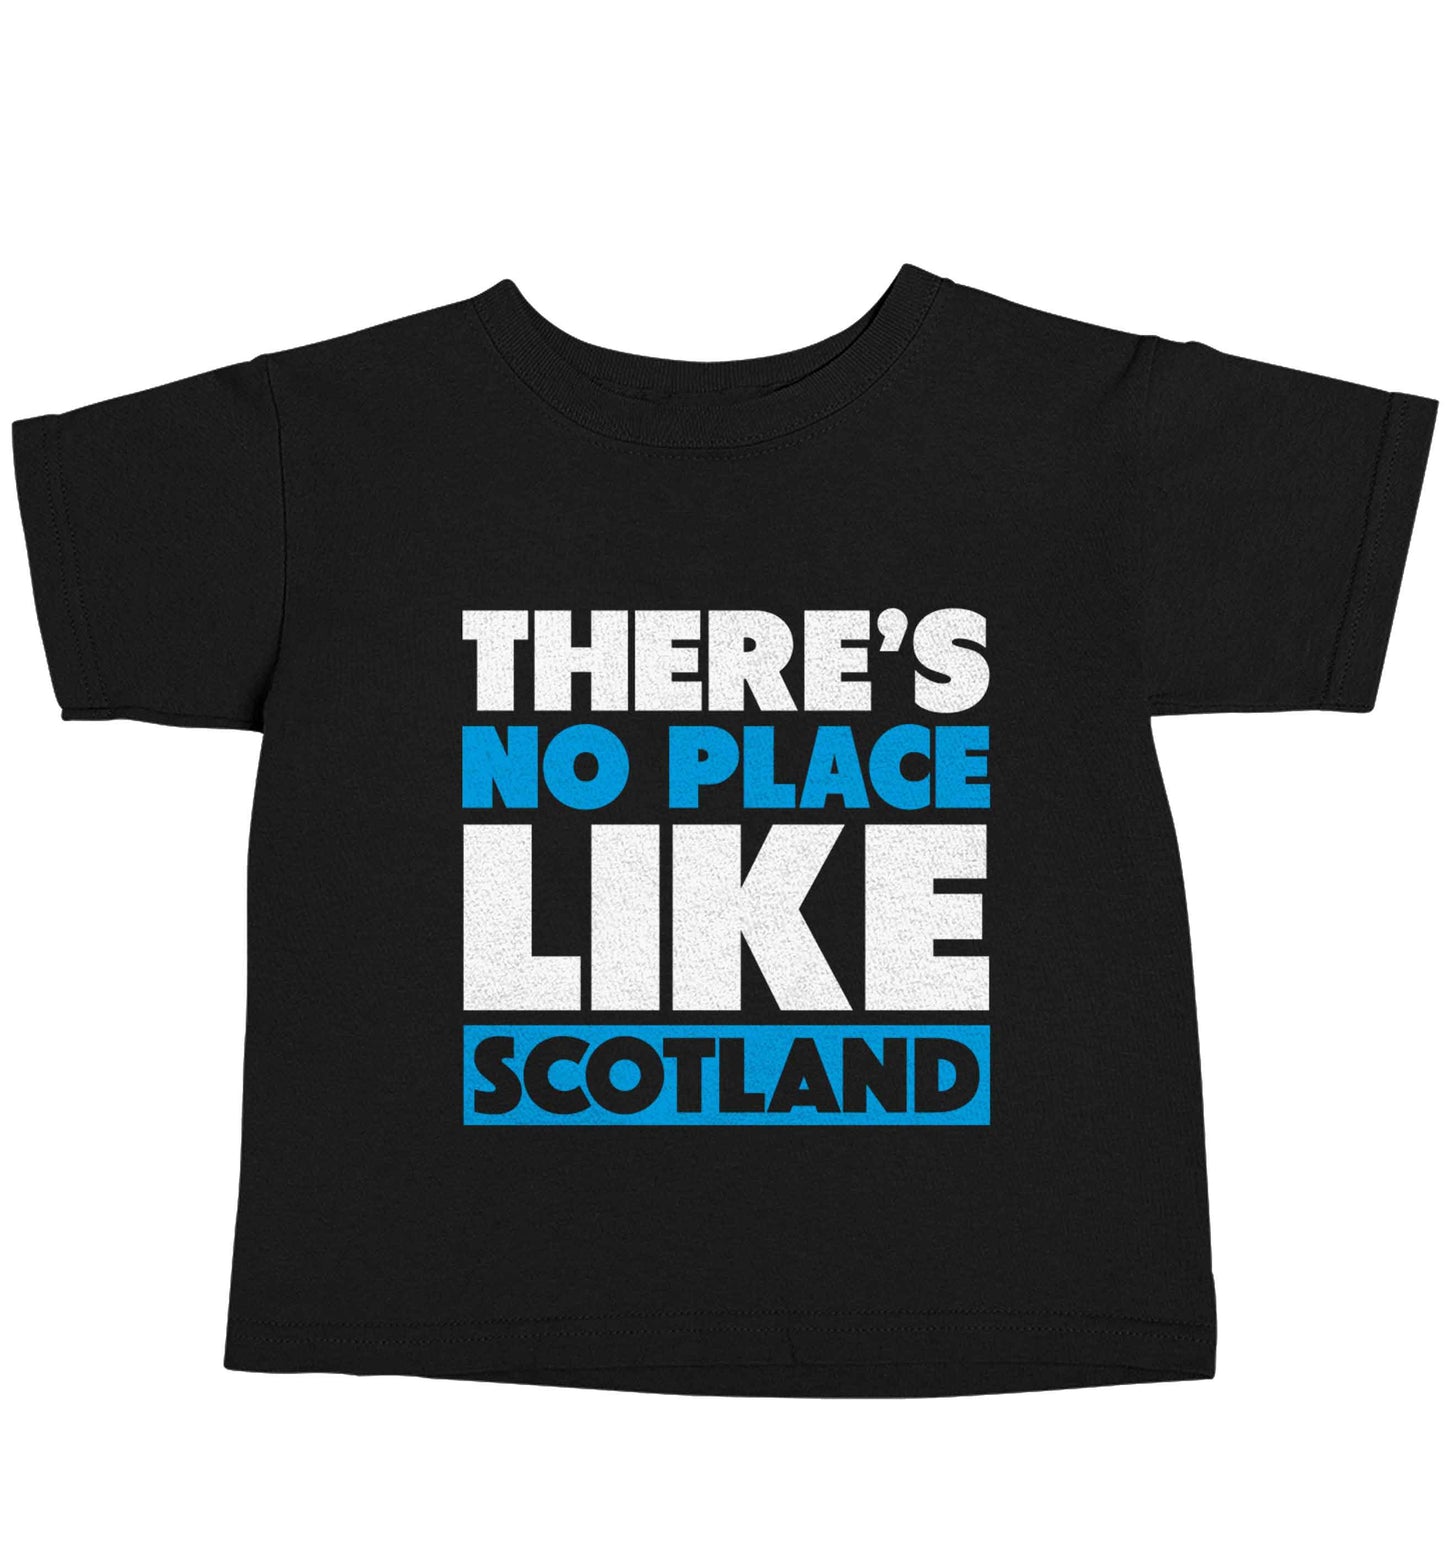 There's no place like Scotland Black baby toddler Tshirt 2 years